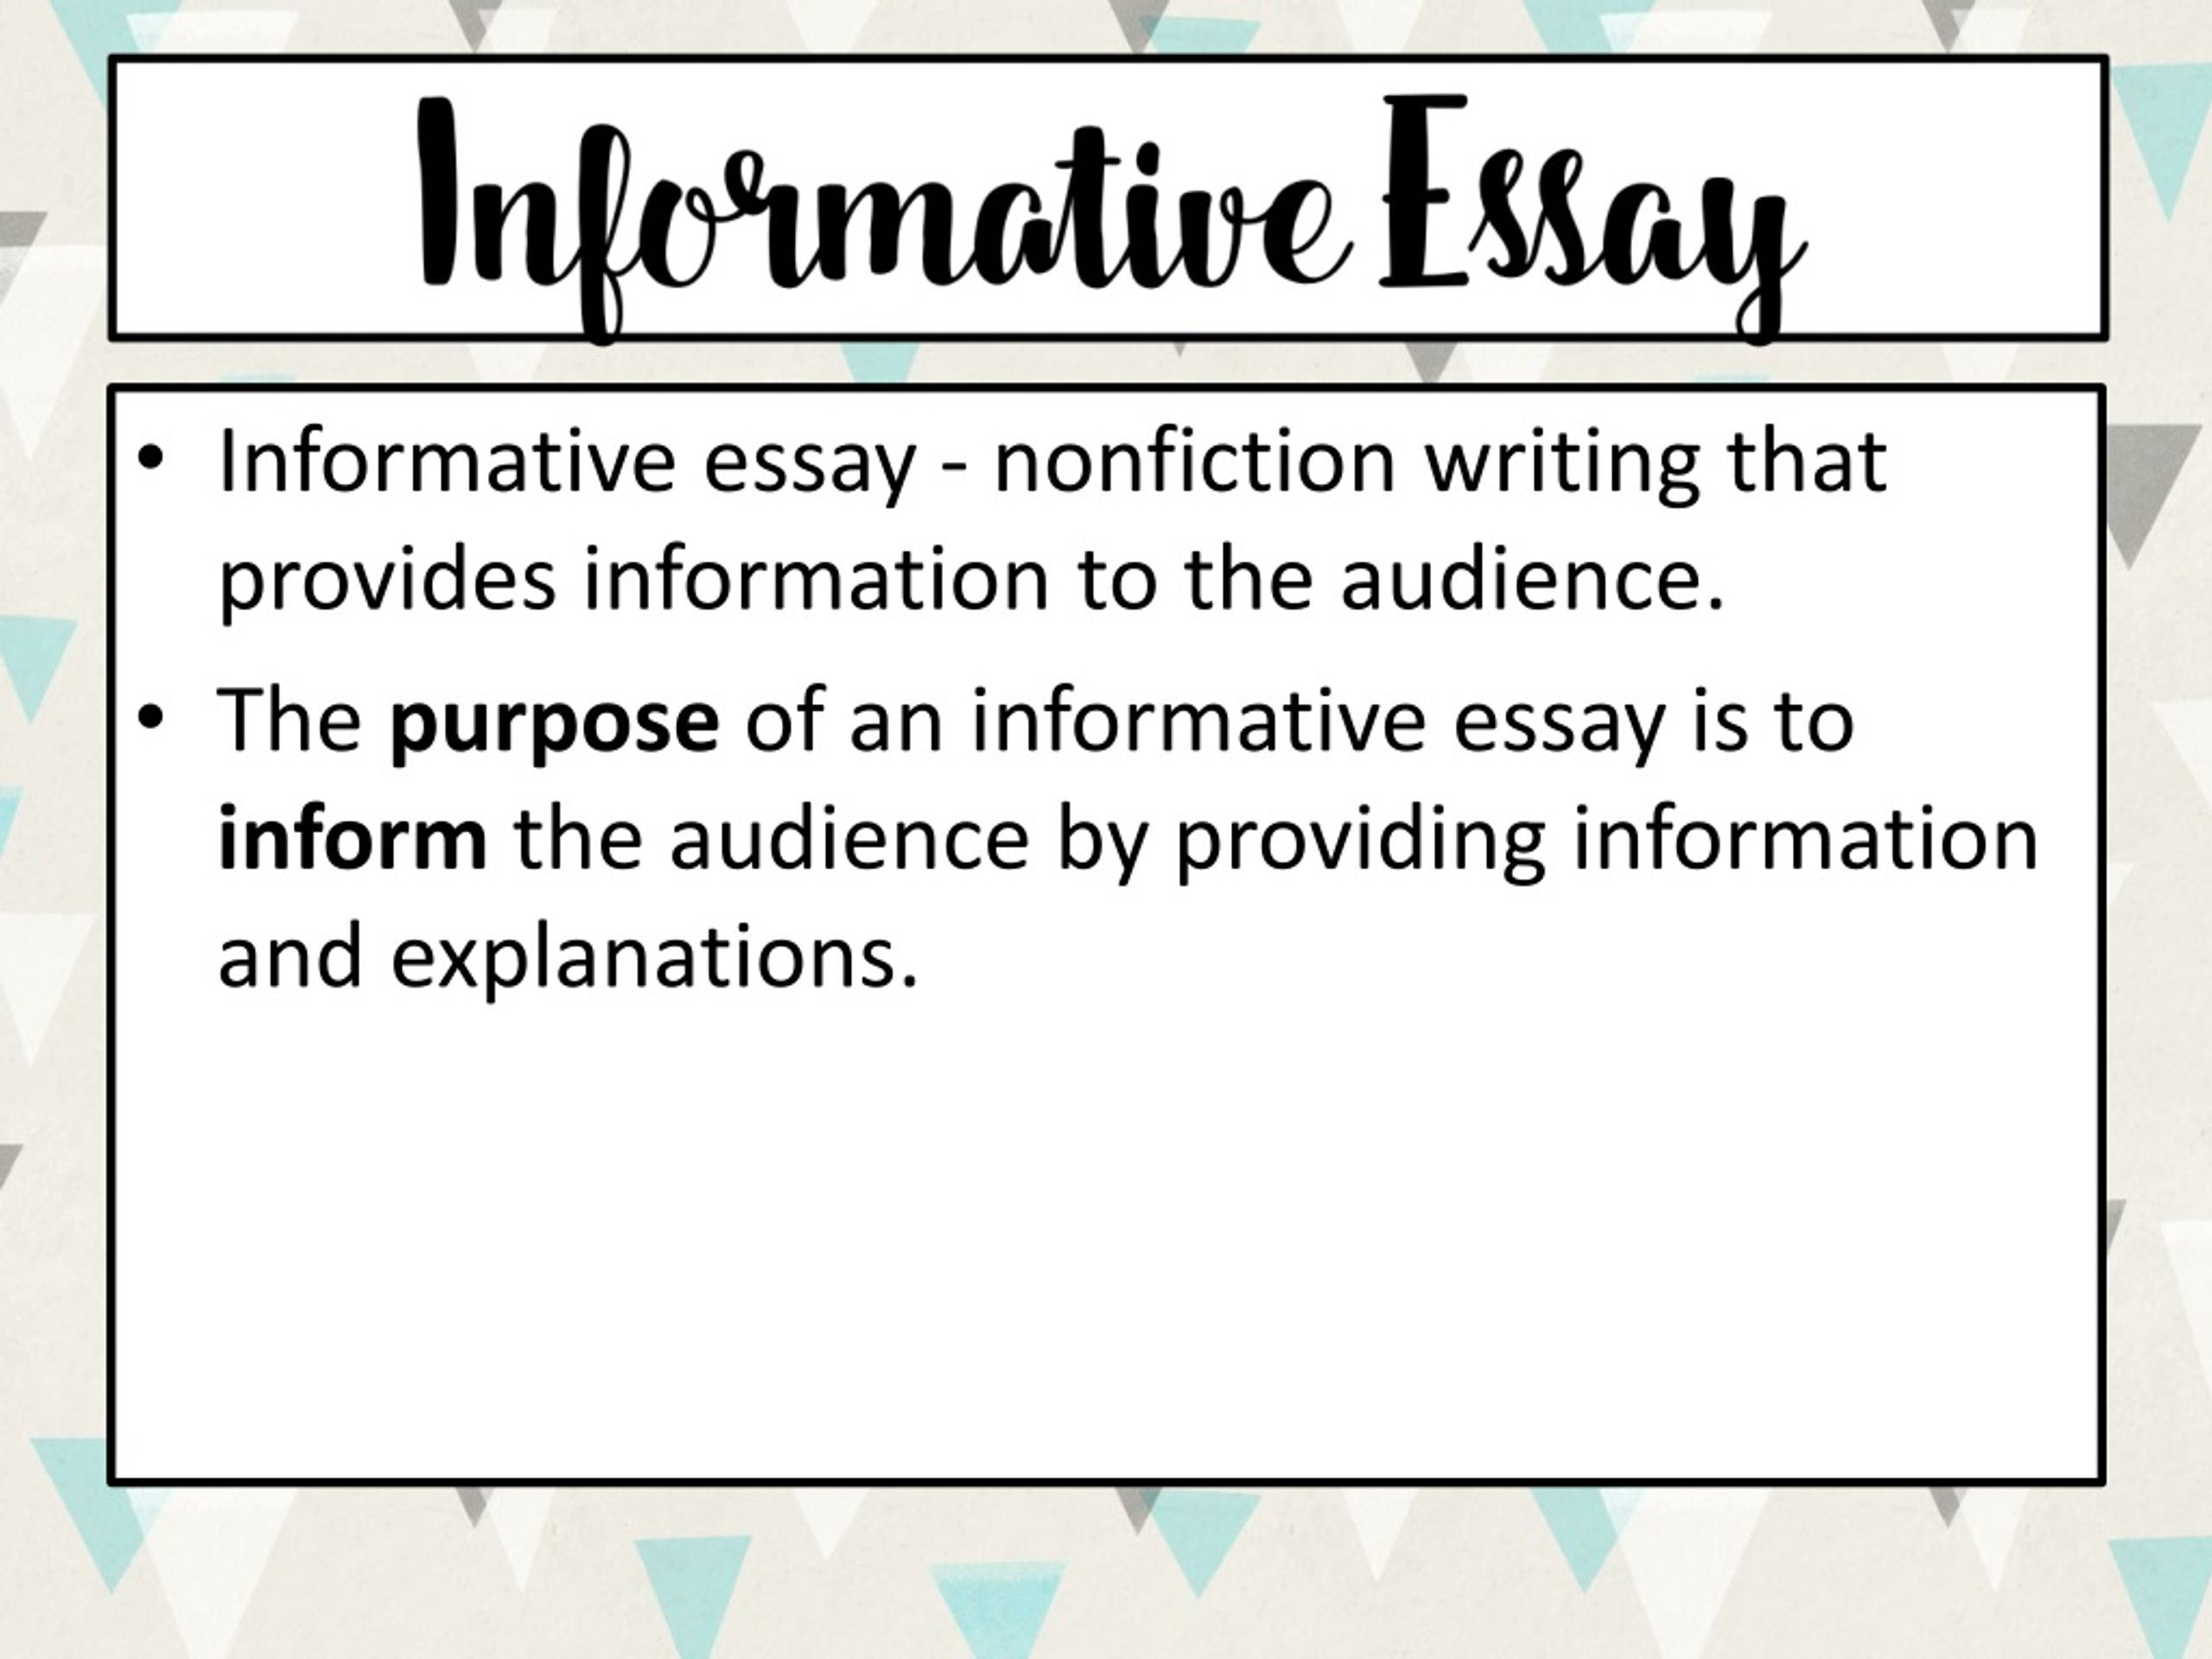 meaning of informative essay